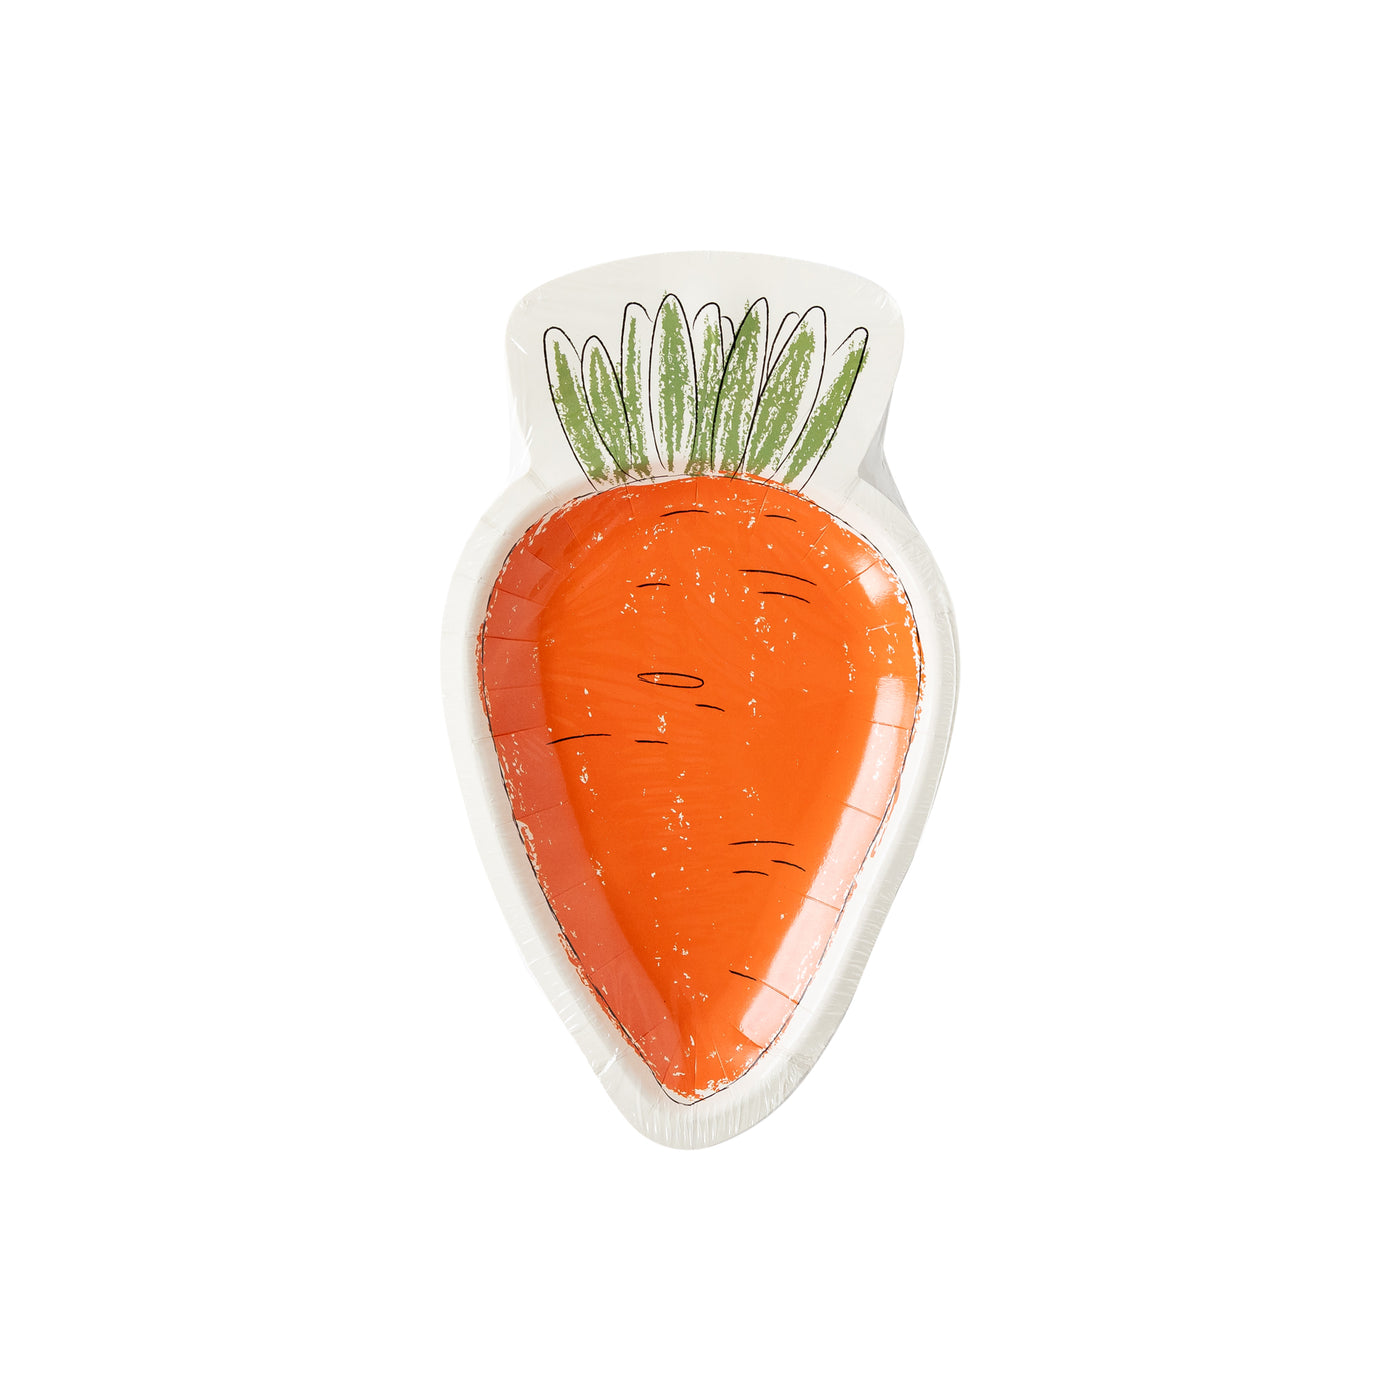 Sketchy Carrot Shaped Plate